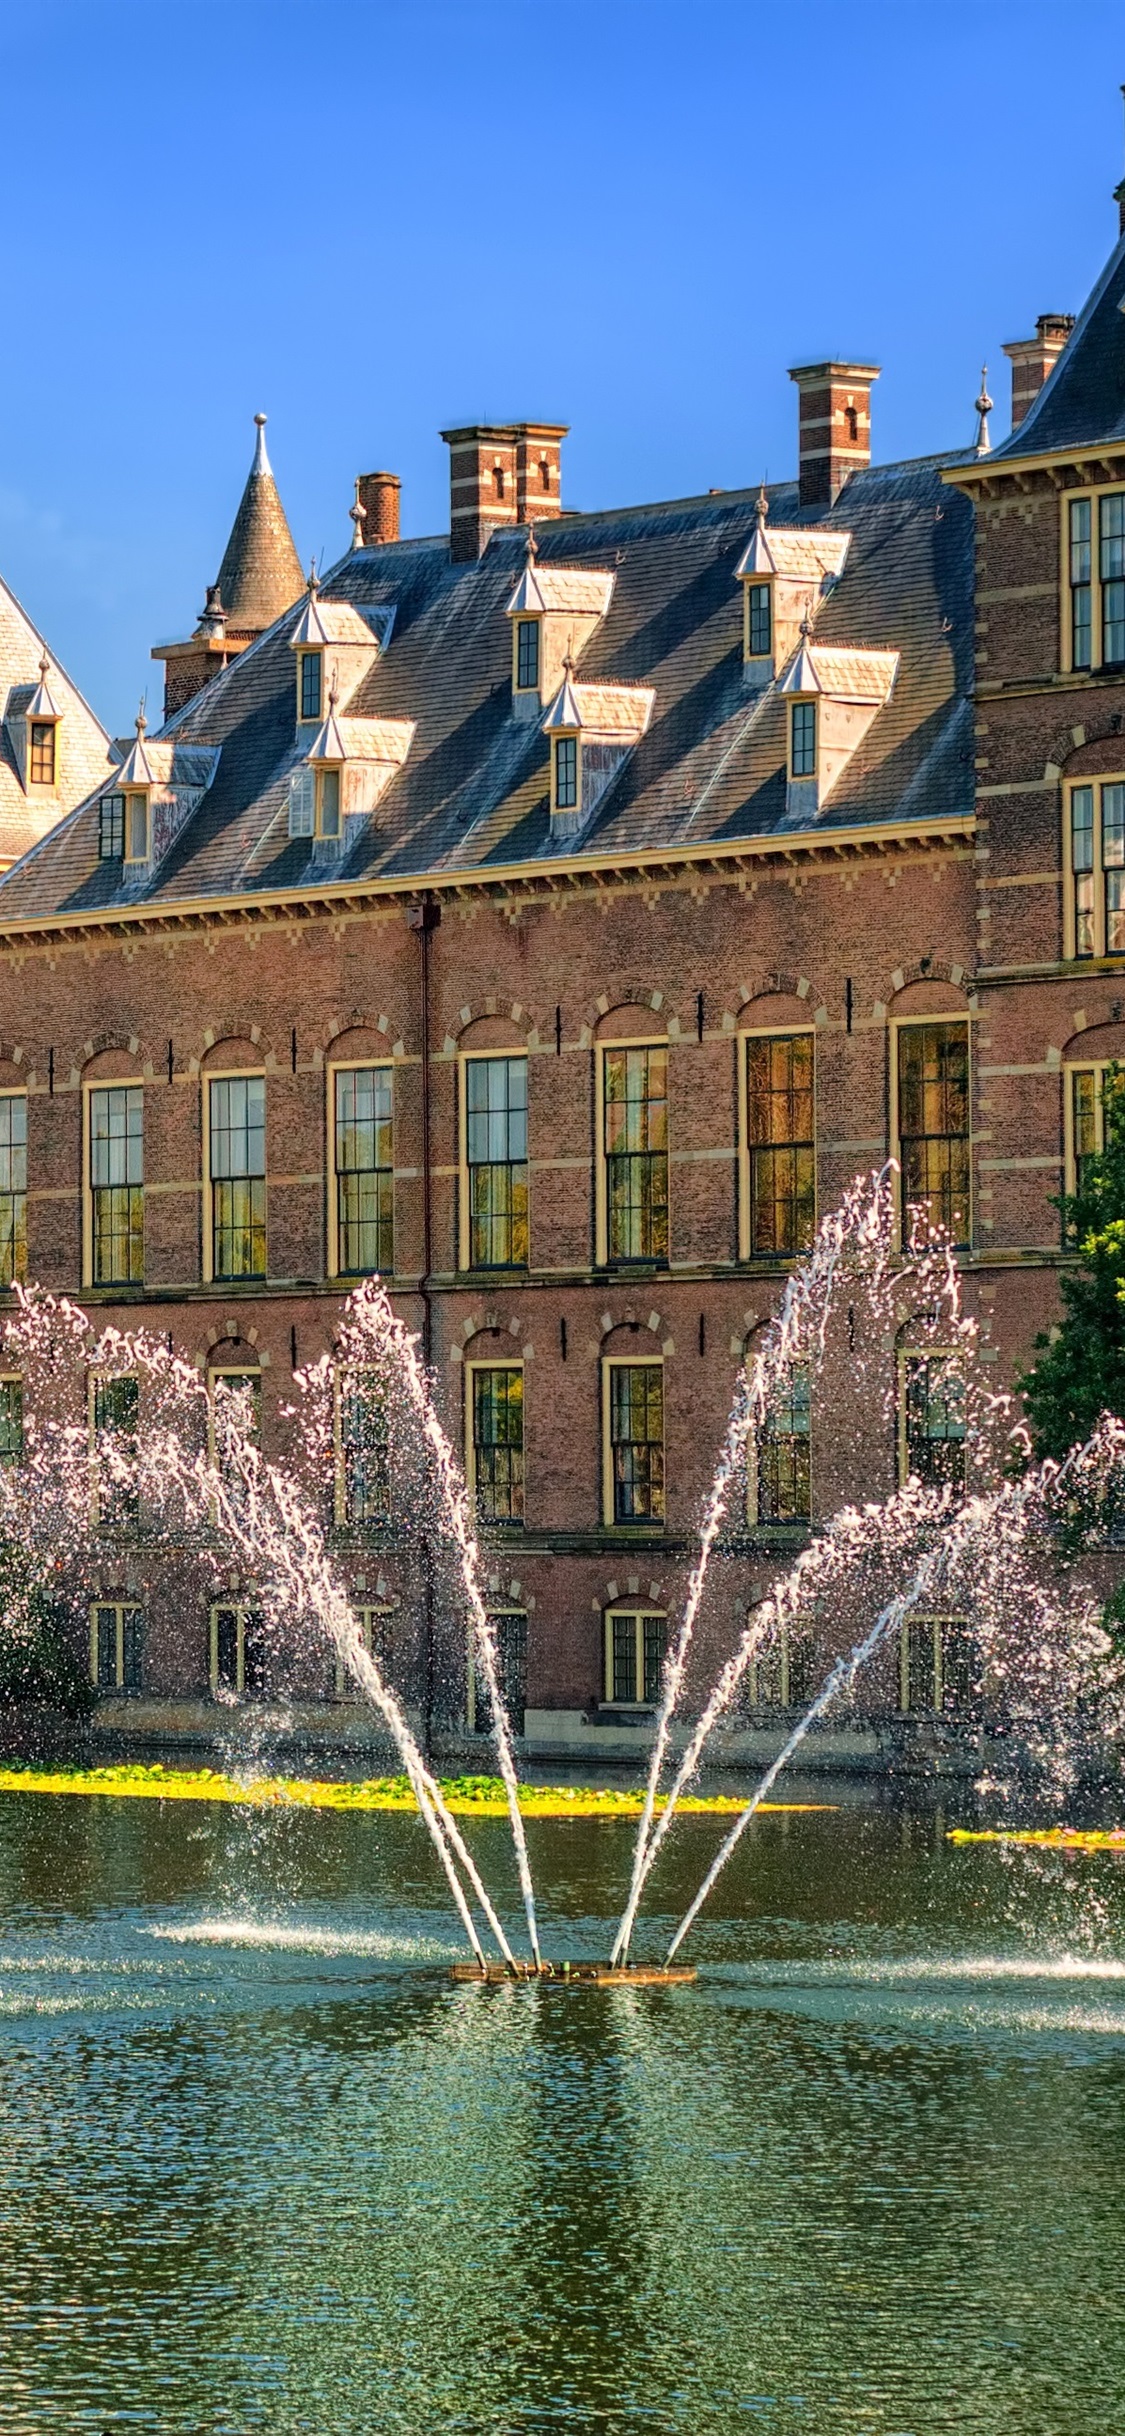 Netherlands, Hague, Fountains, City 1125x2436 IPhone 11 Pro XS X Wallpaper, Background, Picture, Image